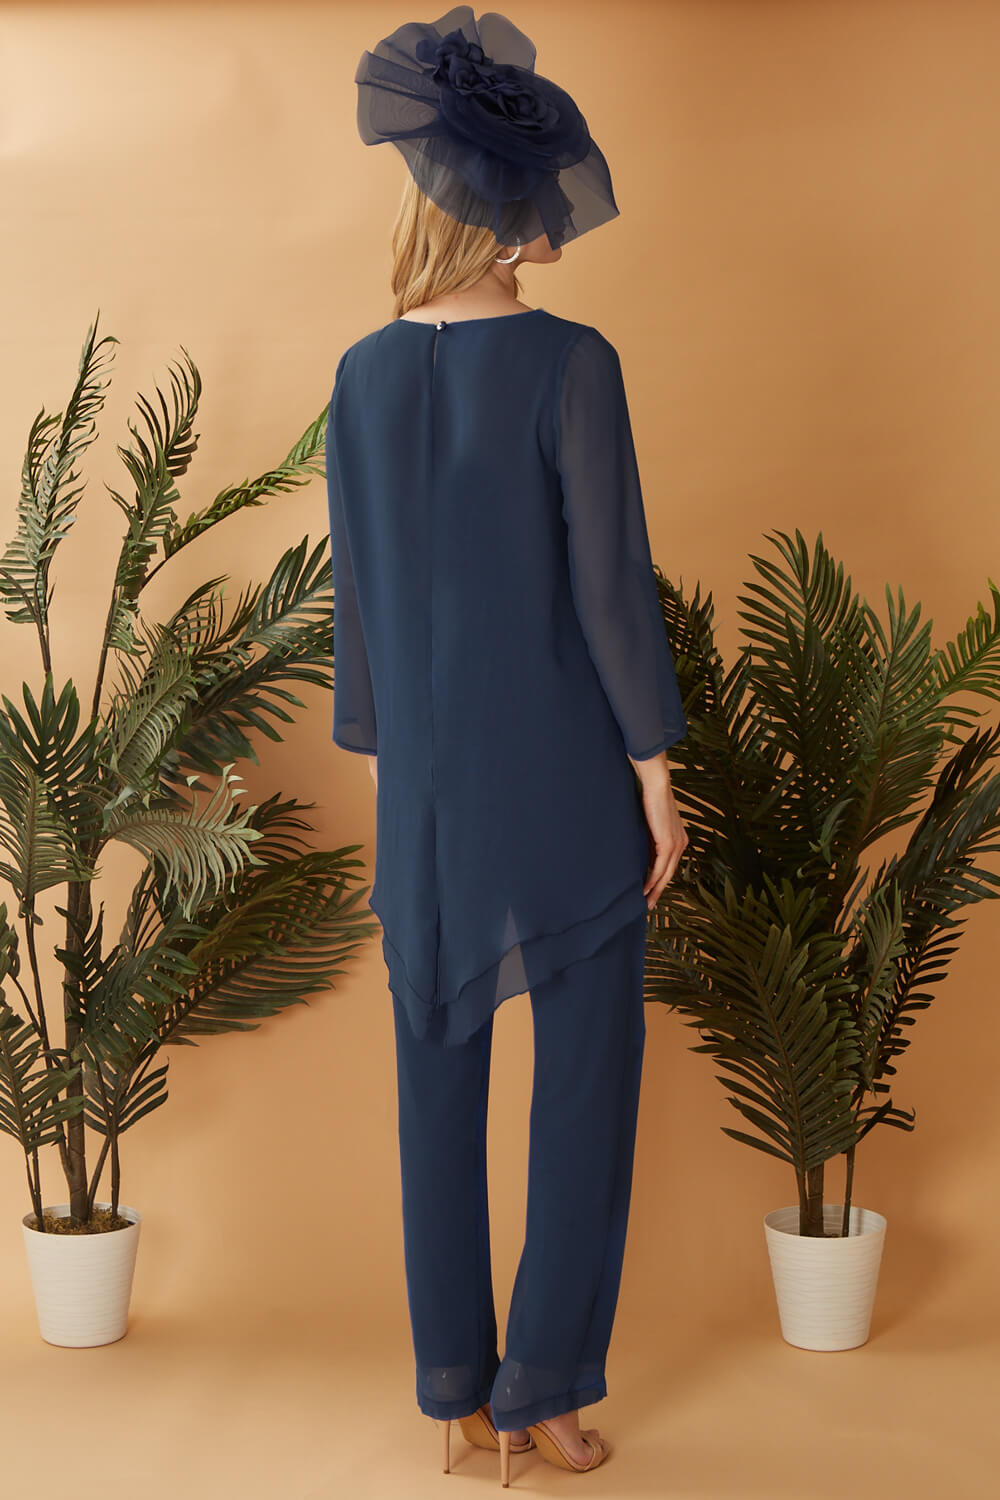 Womens Trouser Suits for sale  eBay